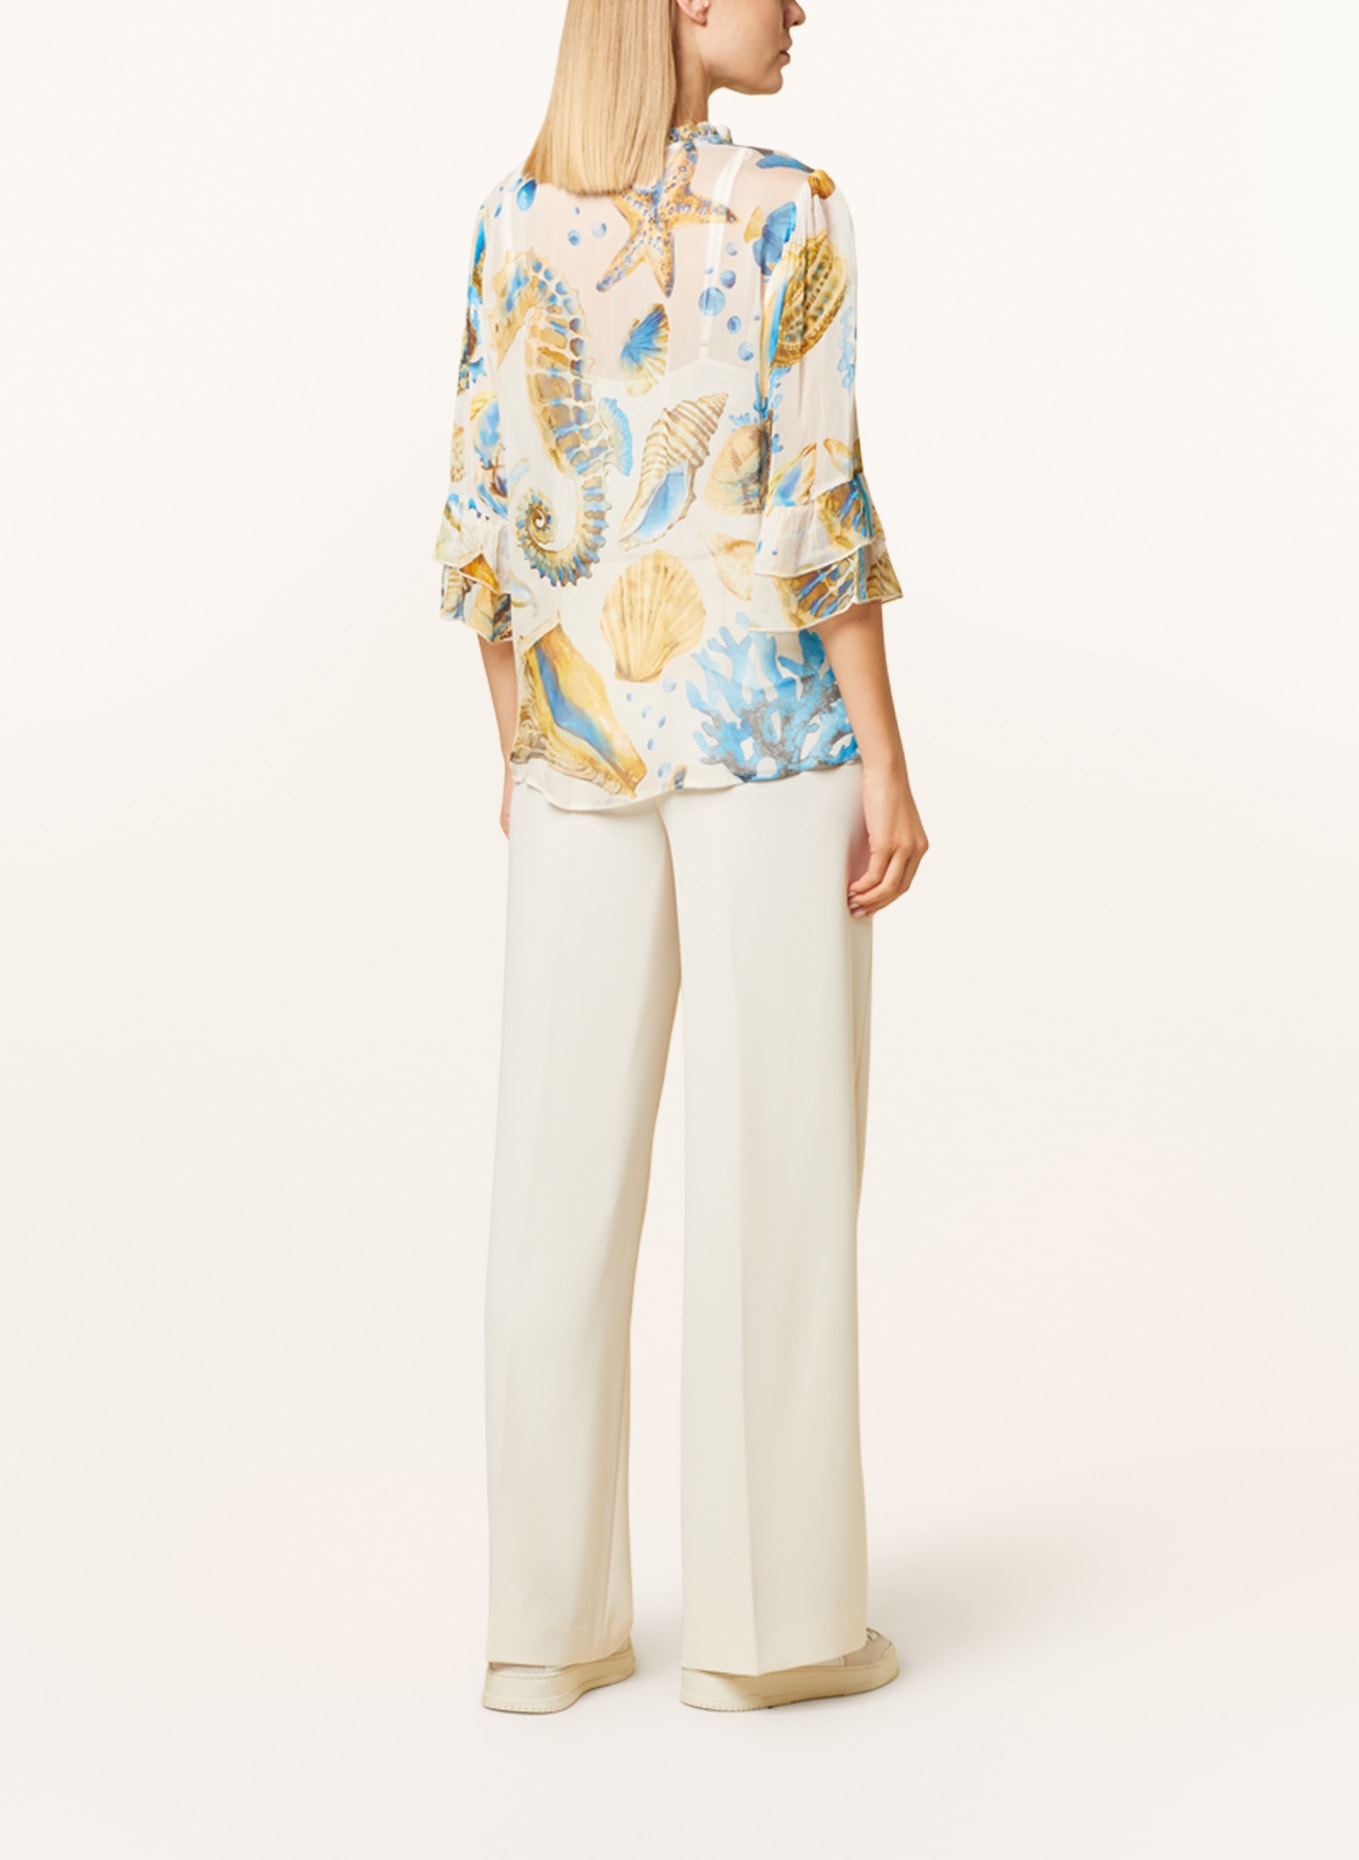 Princess GOES HOLLYWOOD Shirt blouse with 3/4 sleeves, Color: CREAM/ DARK YELLOW/ BLUE (Image 3)